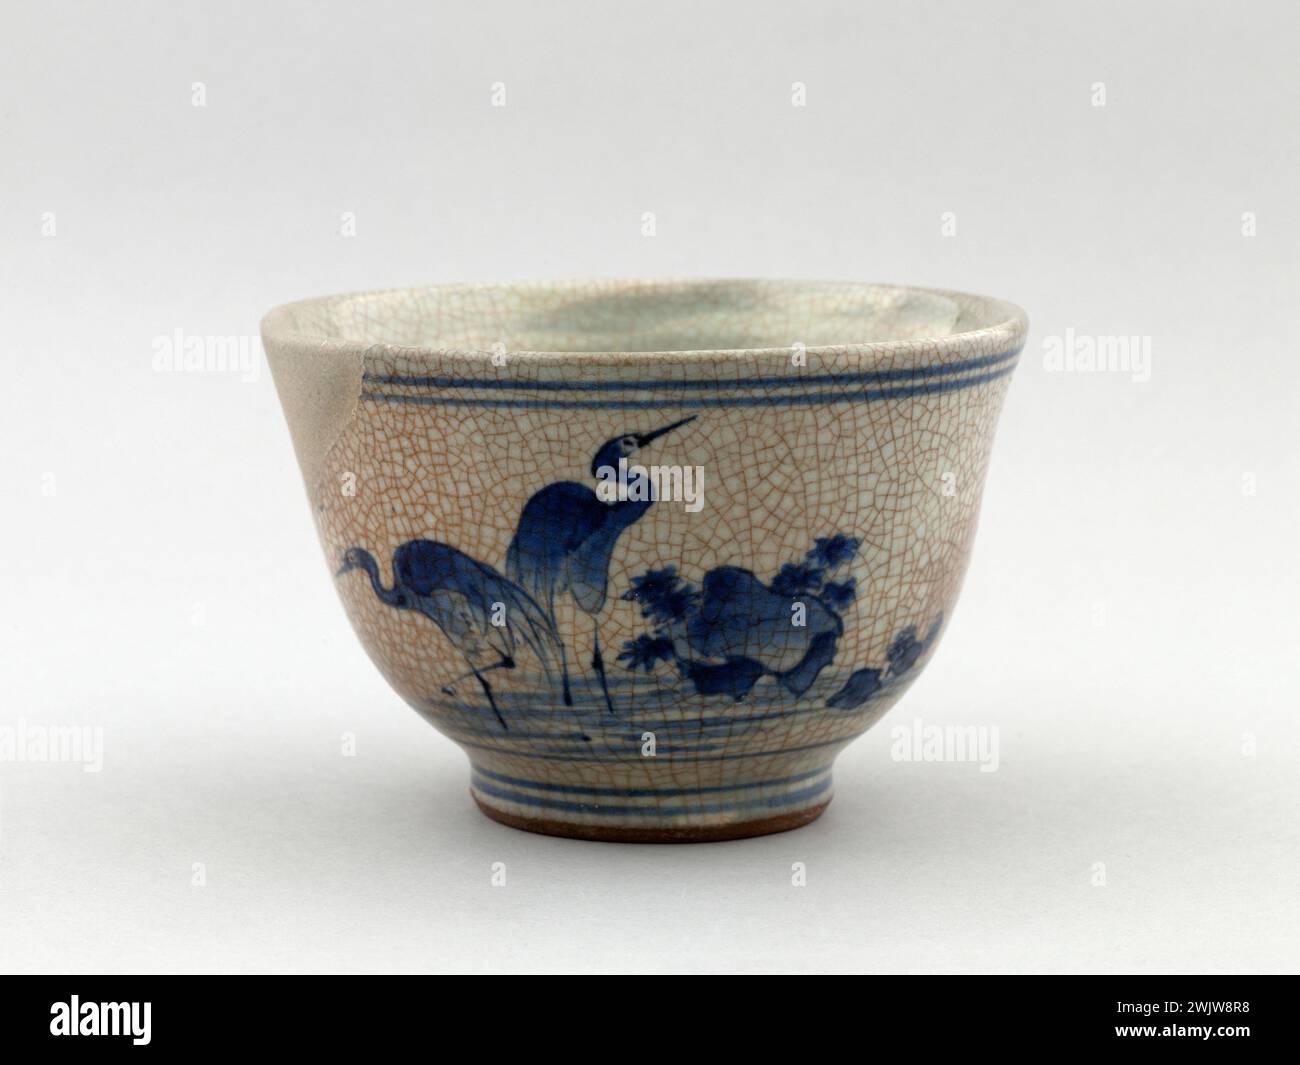 Tea bowl decorated with herons and cascade. Japan, province of Hizen, between 1650 and 1680. Ceramic. Paris, Cernuschi museum. On the outer side, patterns painted blue of herons and waterfalls. Above and at the base, two horizontal lines go around. BLEU, BOL A THE, Blue, CERAMIQUE, CRACKLED, CRAQUELURE, Ceramic, DECOR, DECORATE, Heron, TEA BOWL, VAISSELLE, Water, Waterfall, cascade Stock Photo